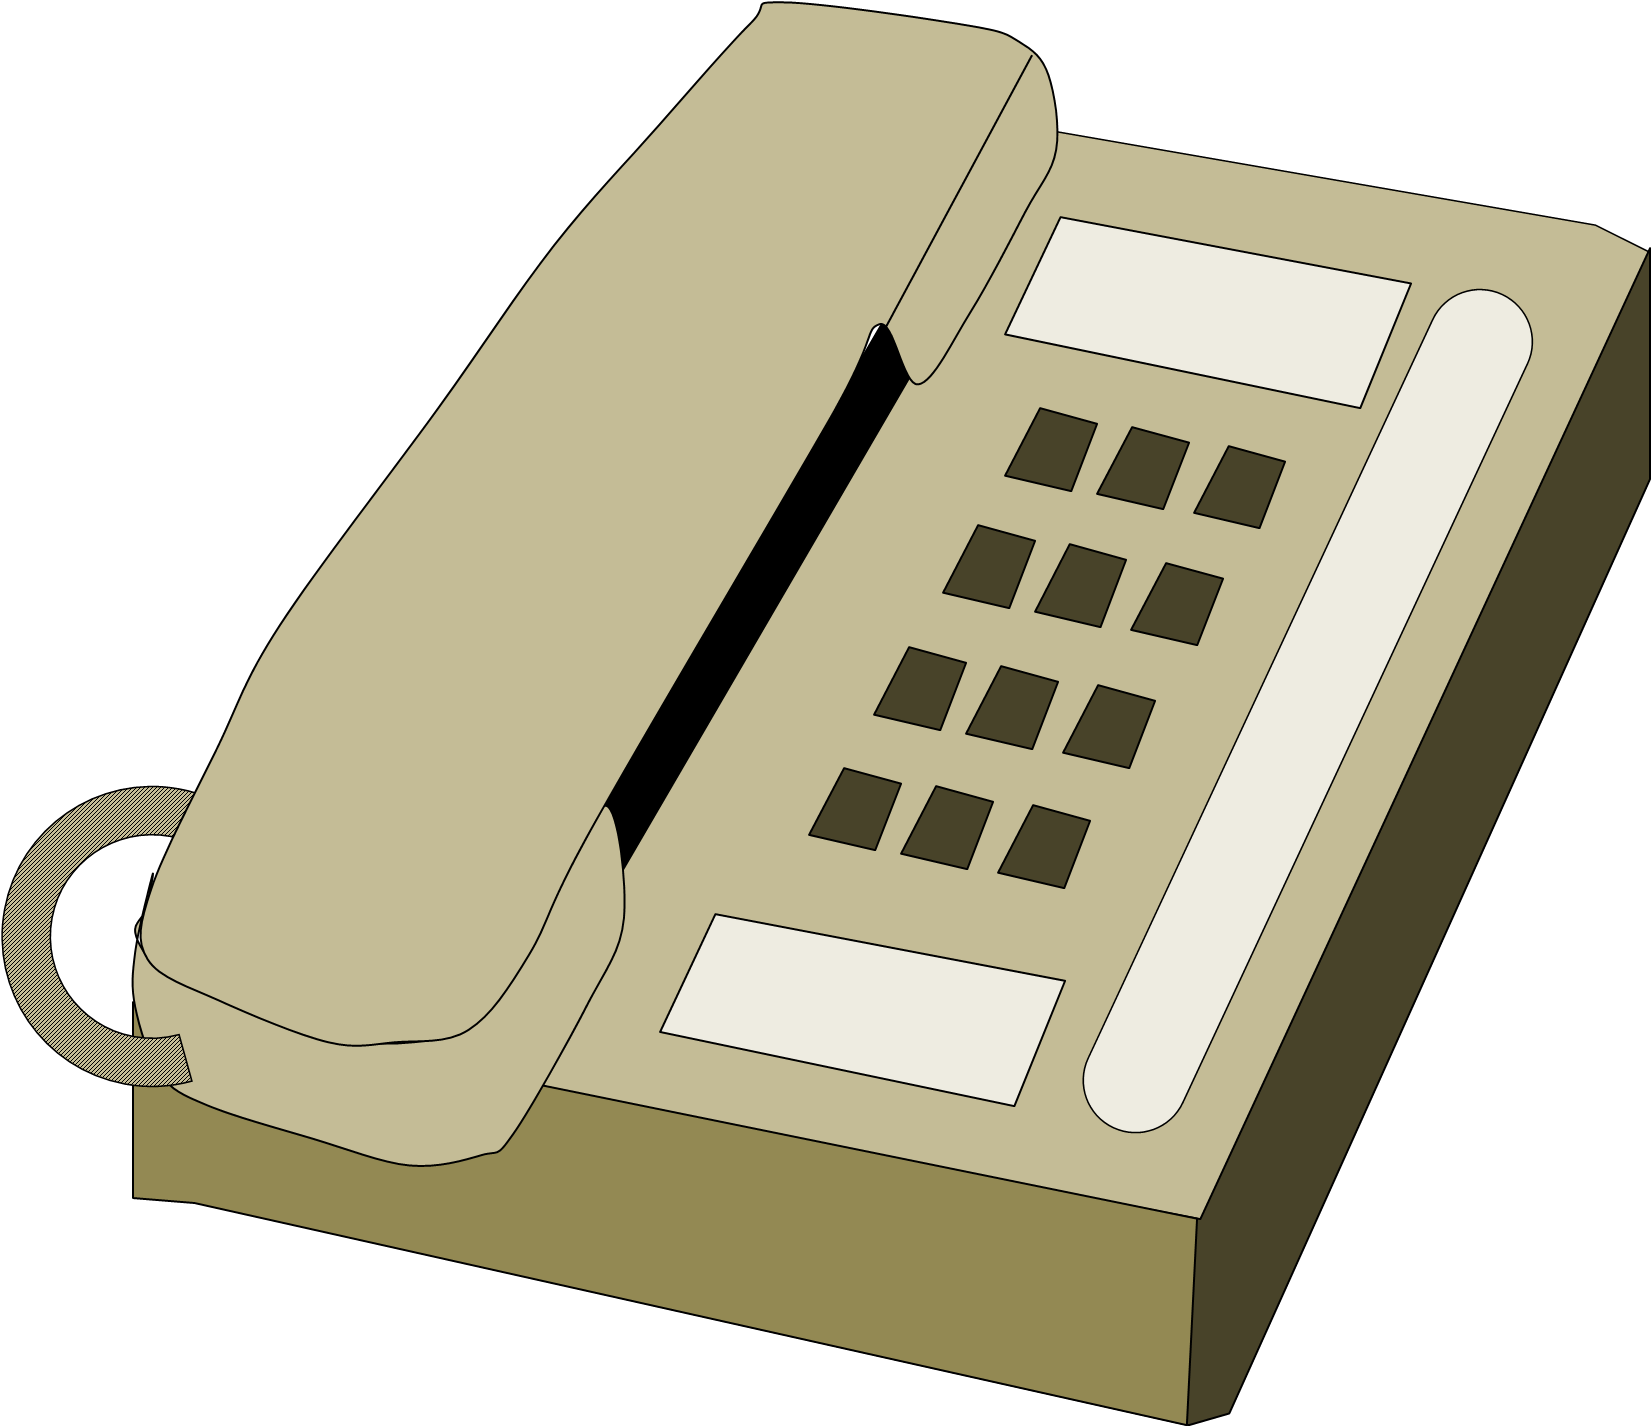 phone clipart drawing